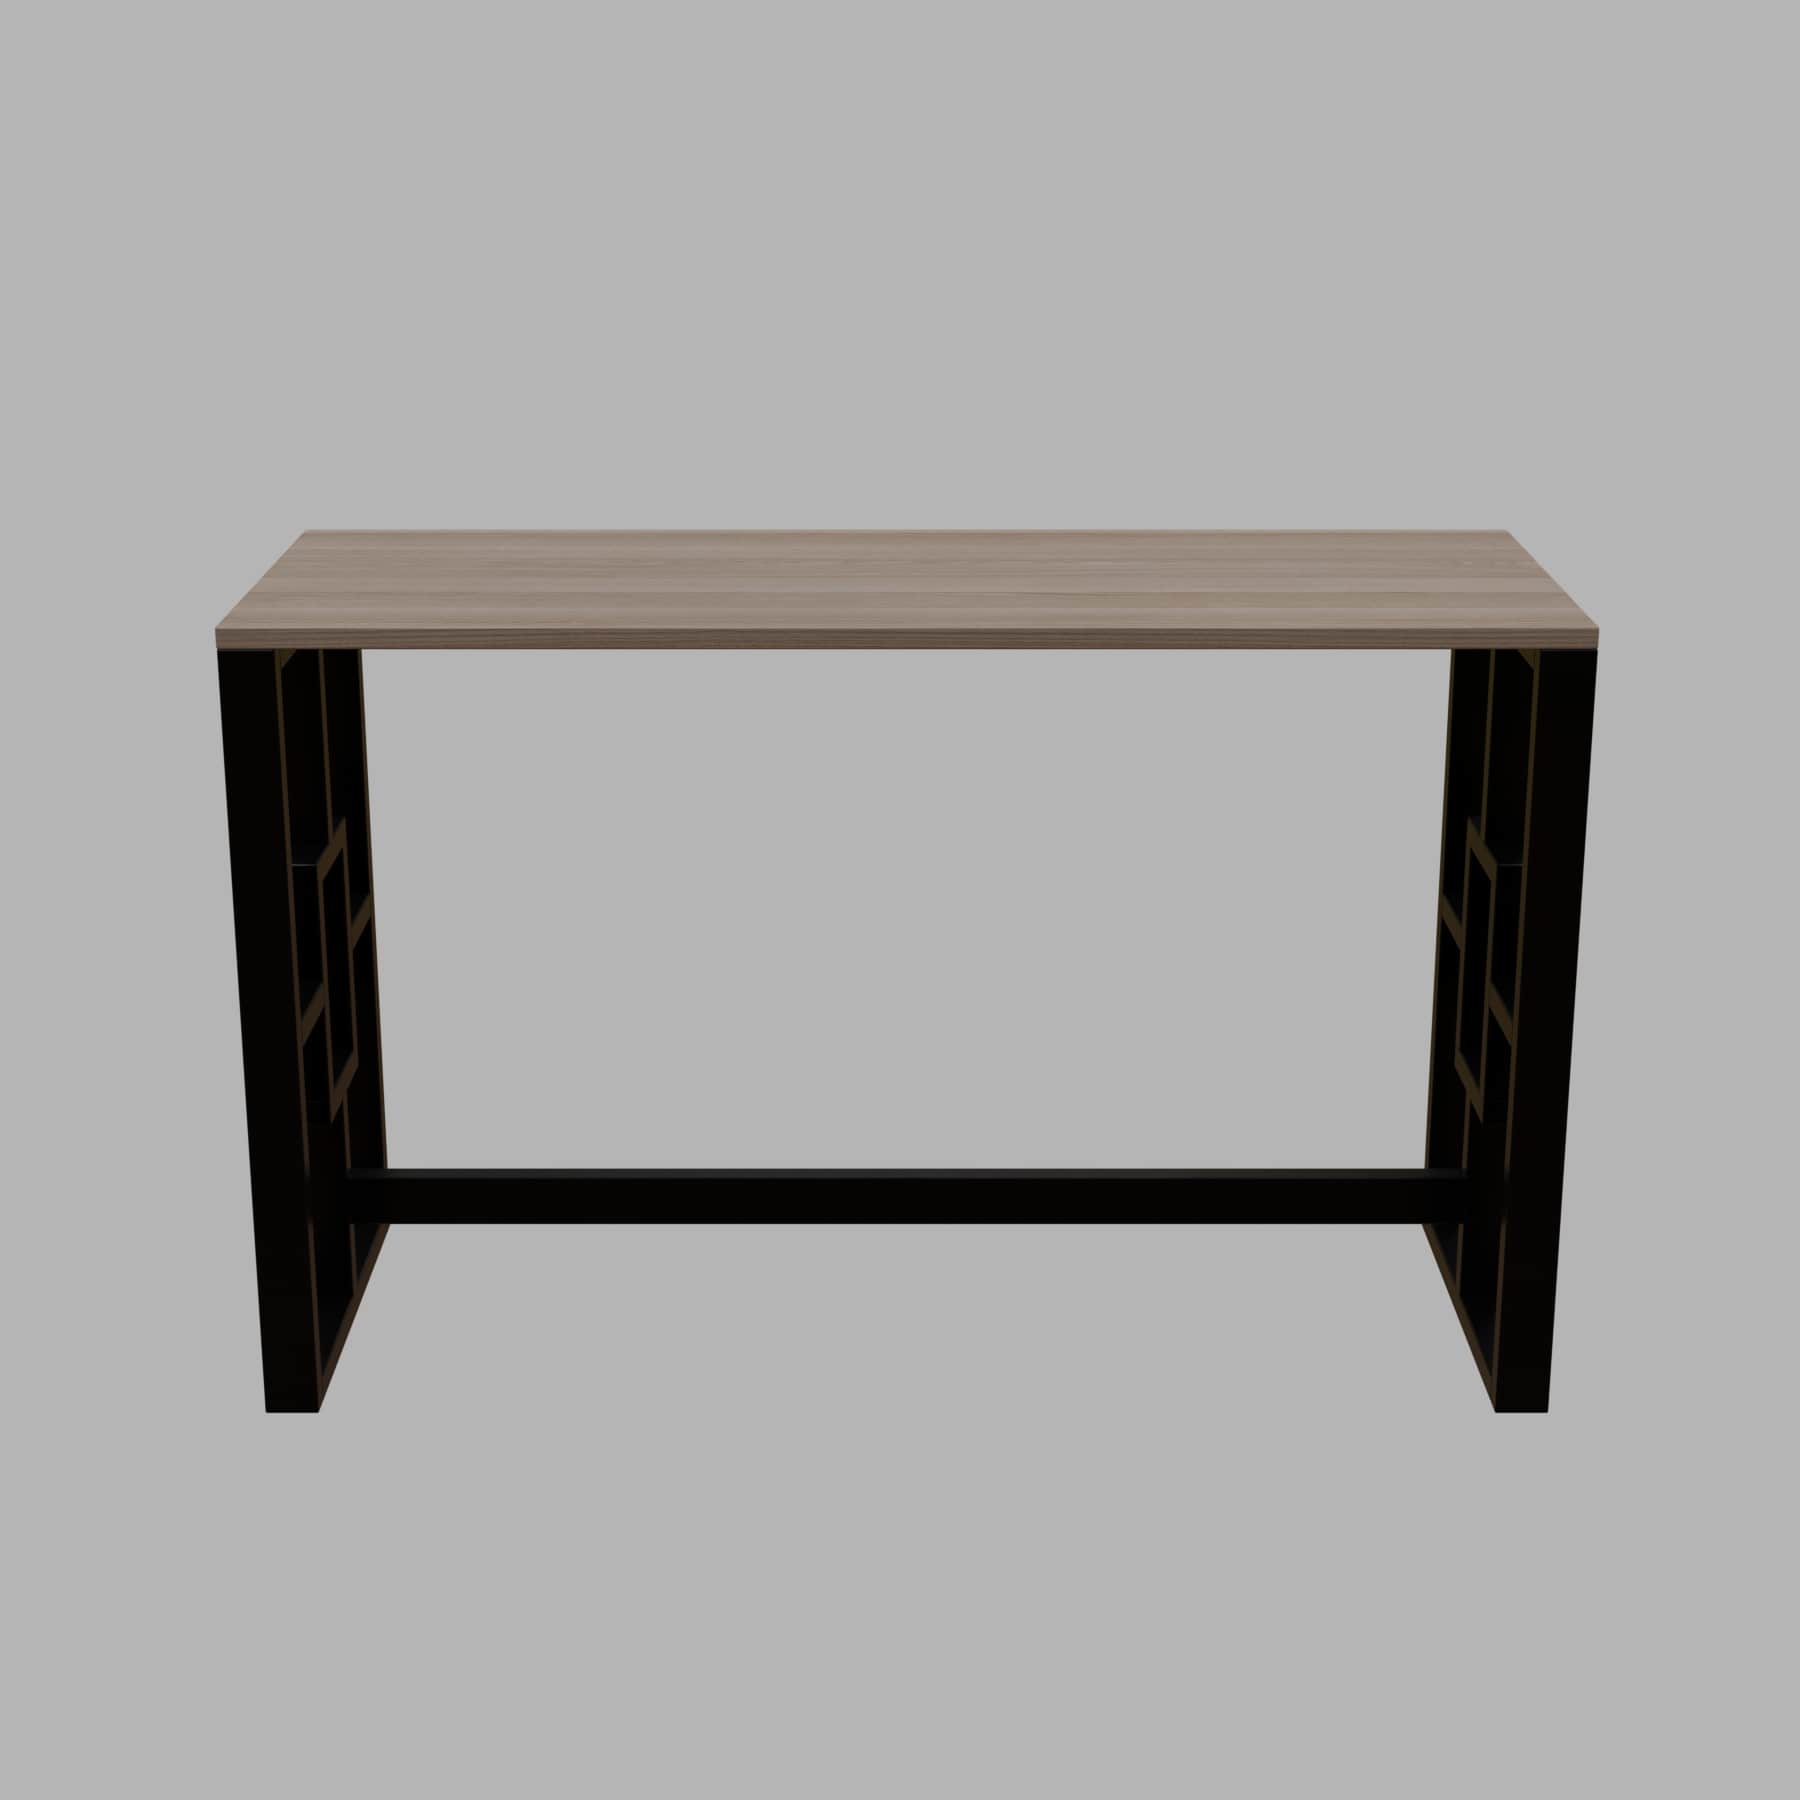 Segur Study Table in Wenge Color